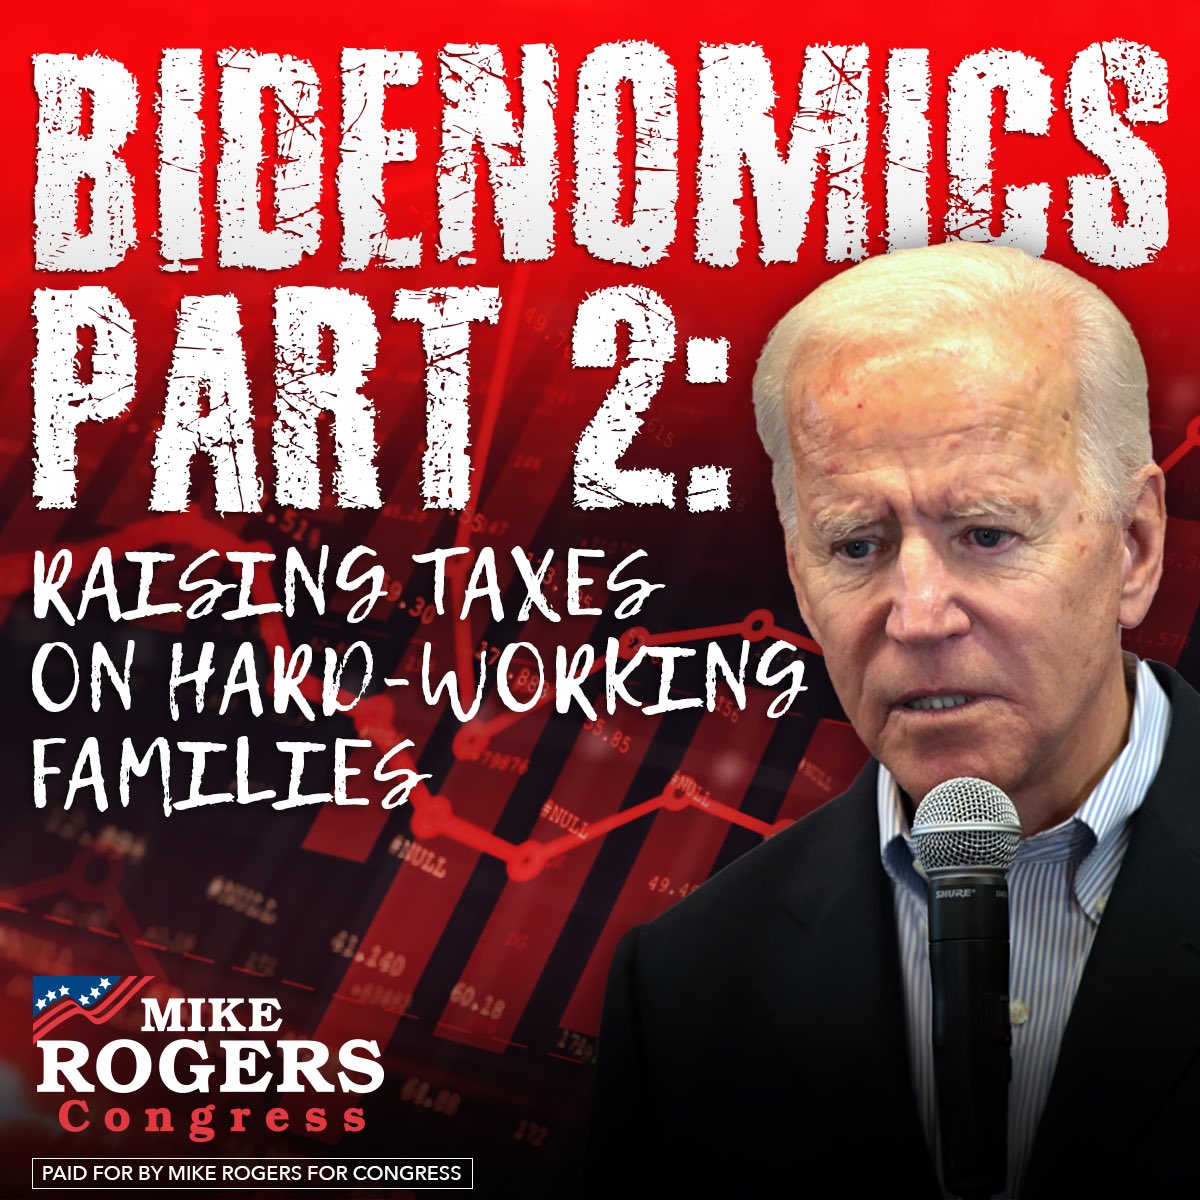 Get ready to pay THOUSANDS more in taxes with another Biden-Harris term. Crooked Joe has made it clear that he will undo the tax cuts that delivered RECORD GROWTH for the middle class if he’s re-elected.  It can’t happen. Our economy will not endure another 4 years of Bidenomics